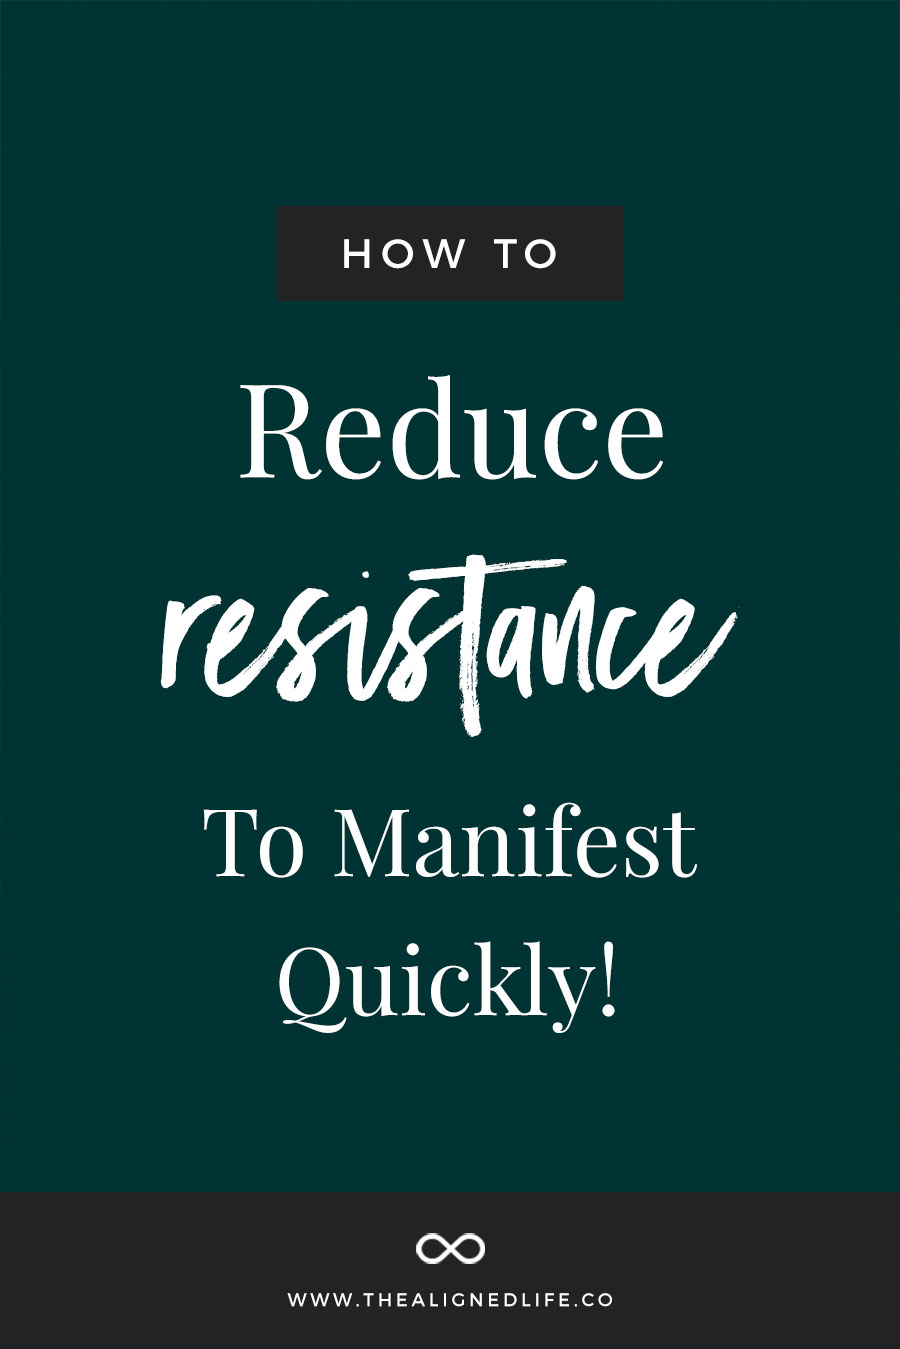 How To Reduce Resistance To Manifest Quickly: 5 Steps